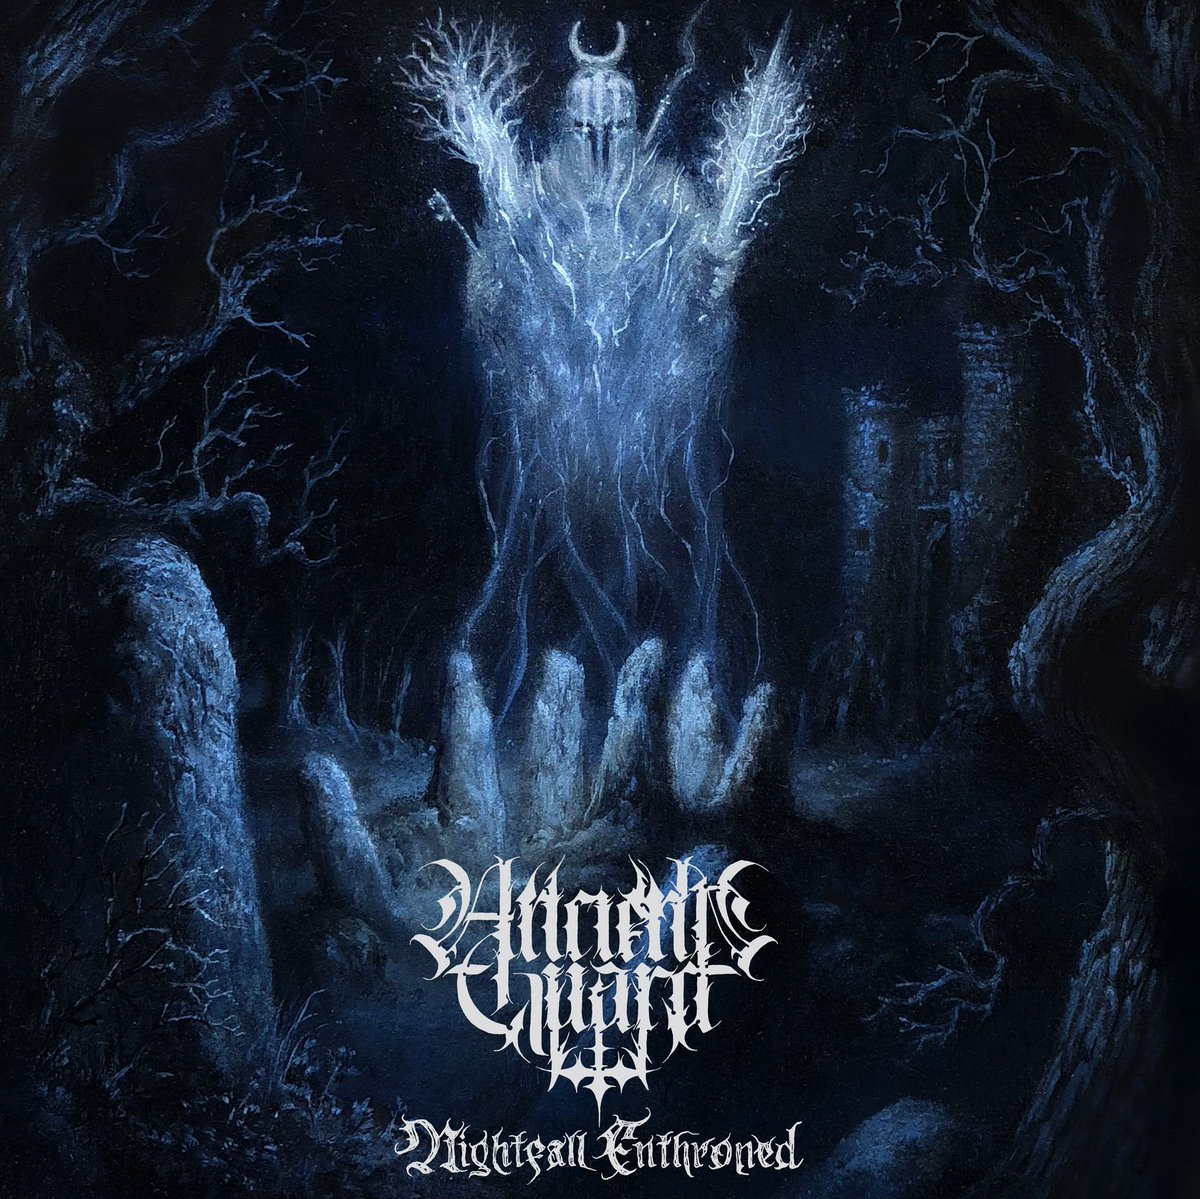 Today, Iron Bonehead Productions announces June 14th as the international release date for Ancient Guard's debut mini-album, Nightfall Enthroned, on CD and 12' vinyl formats.